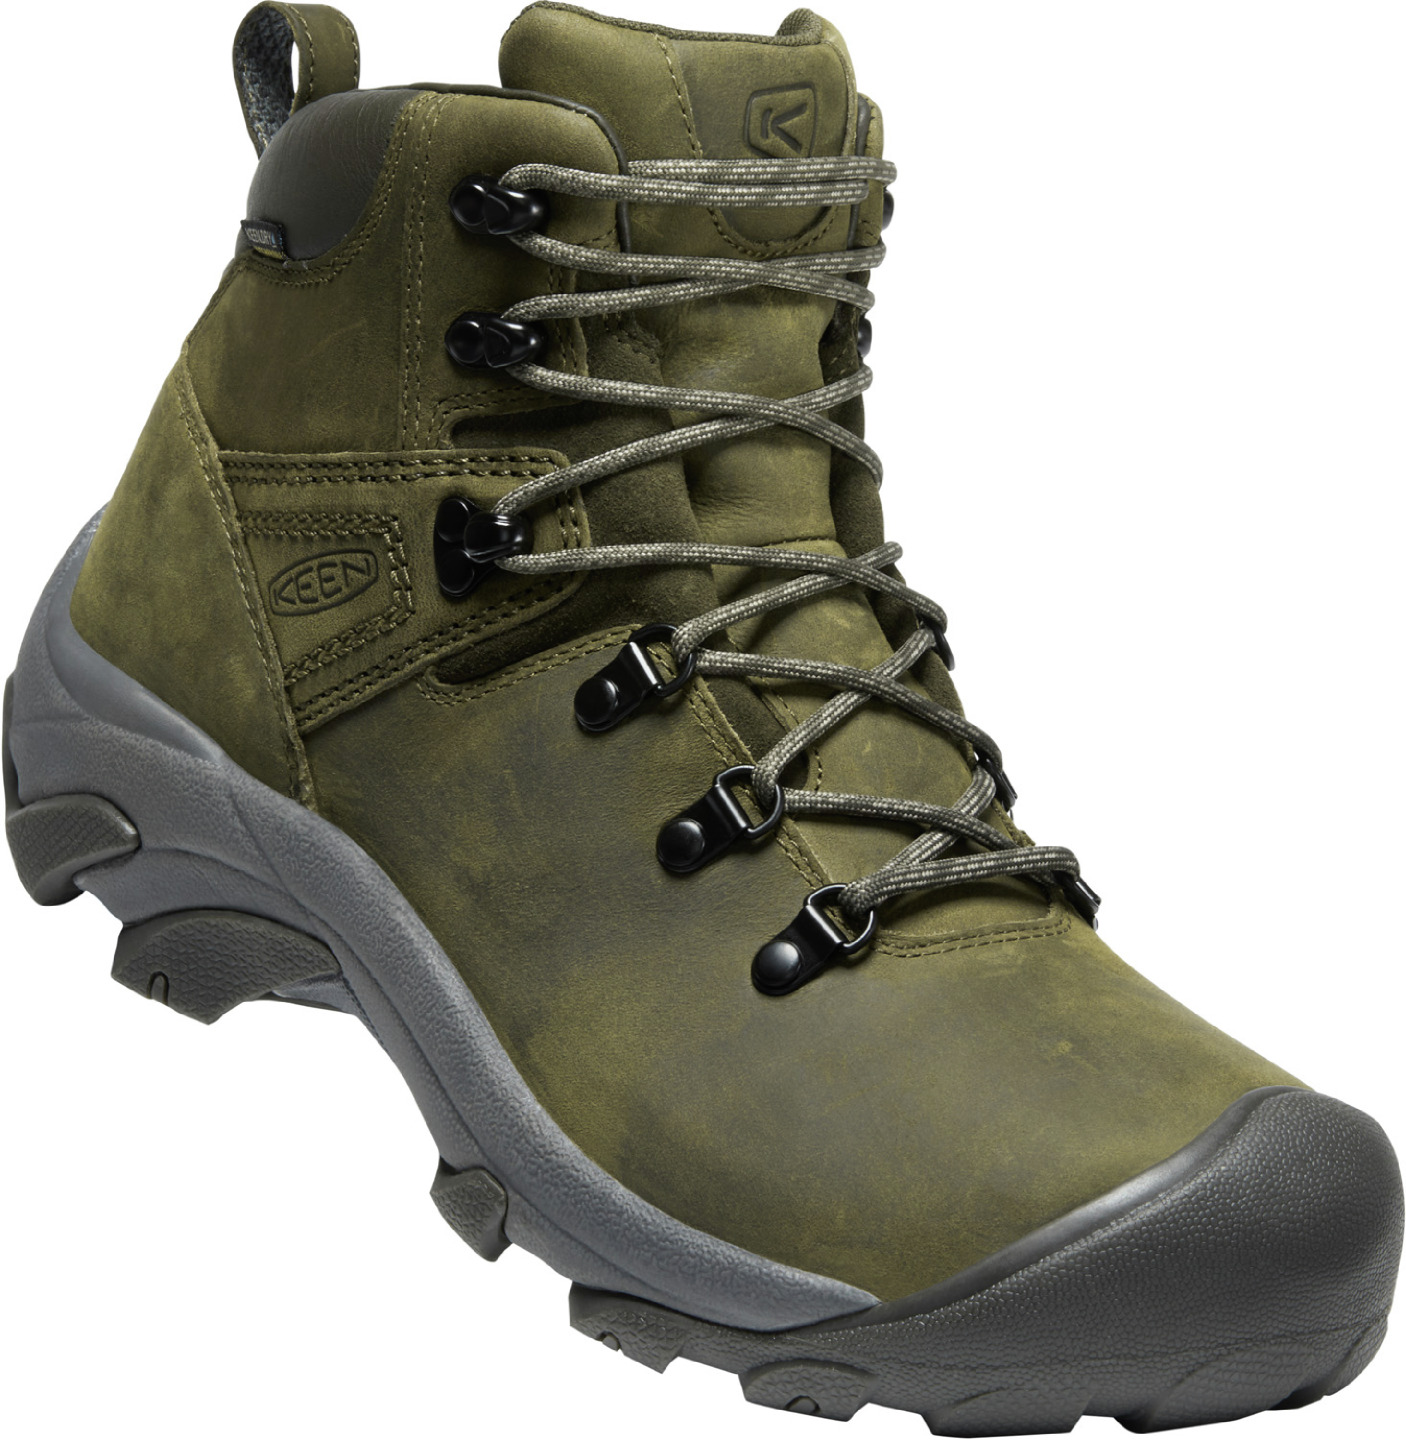 Keen PYRENEES M dark olive/forest night Velikost: 44